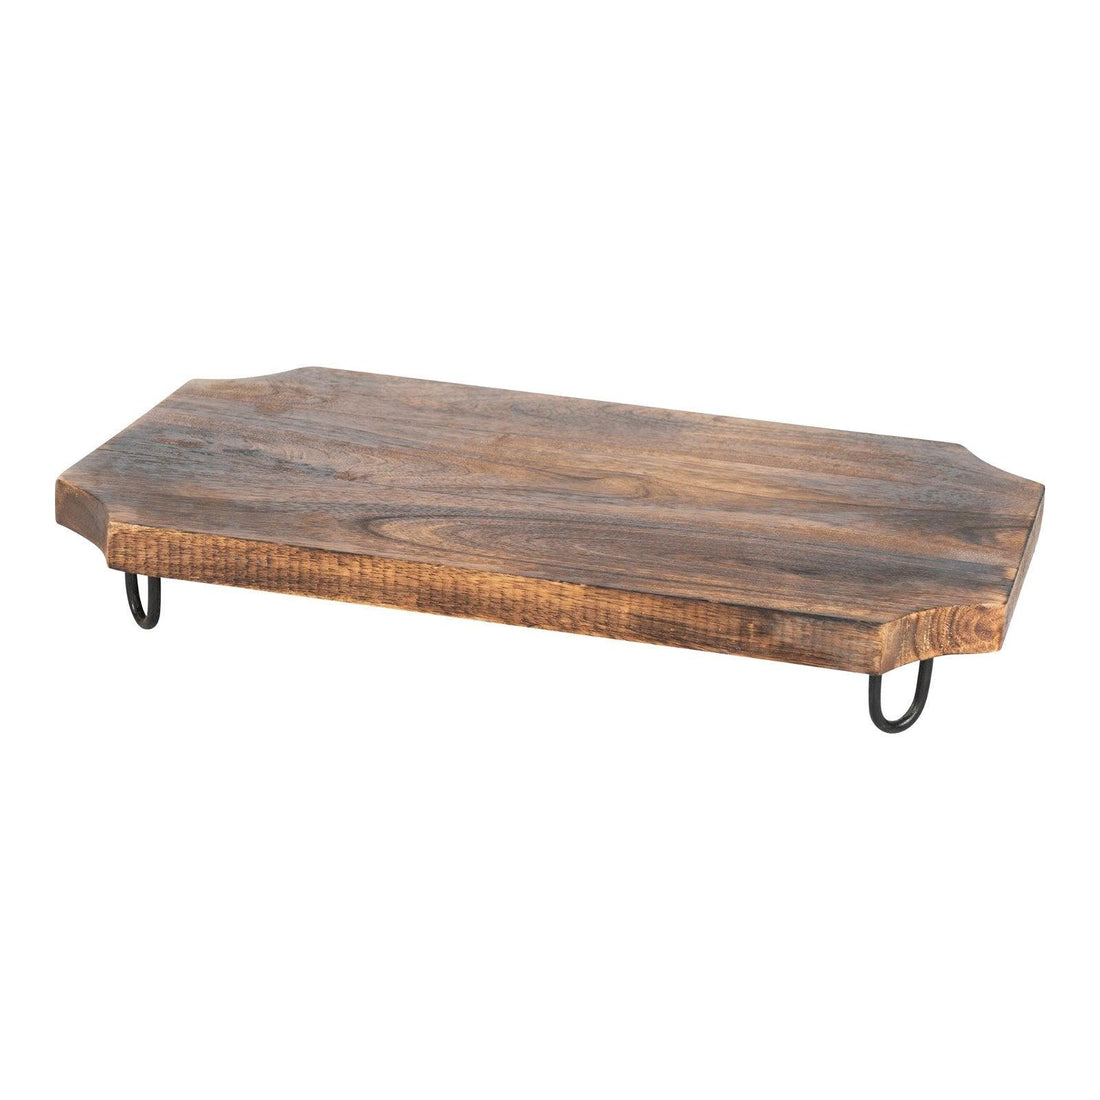 Wooden Distressed Chopping Board On Legs 51cm - £49.99 - Trays & Chopping Boards 